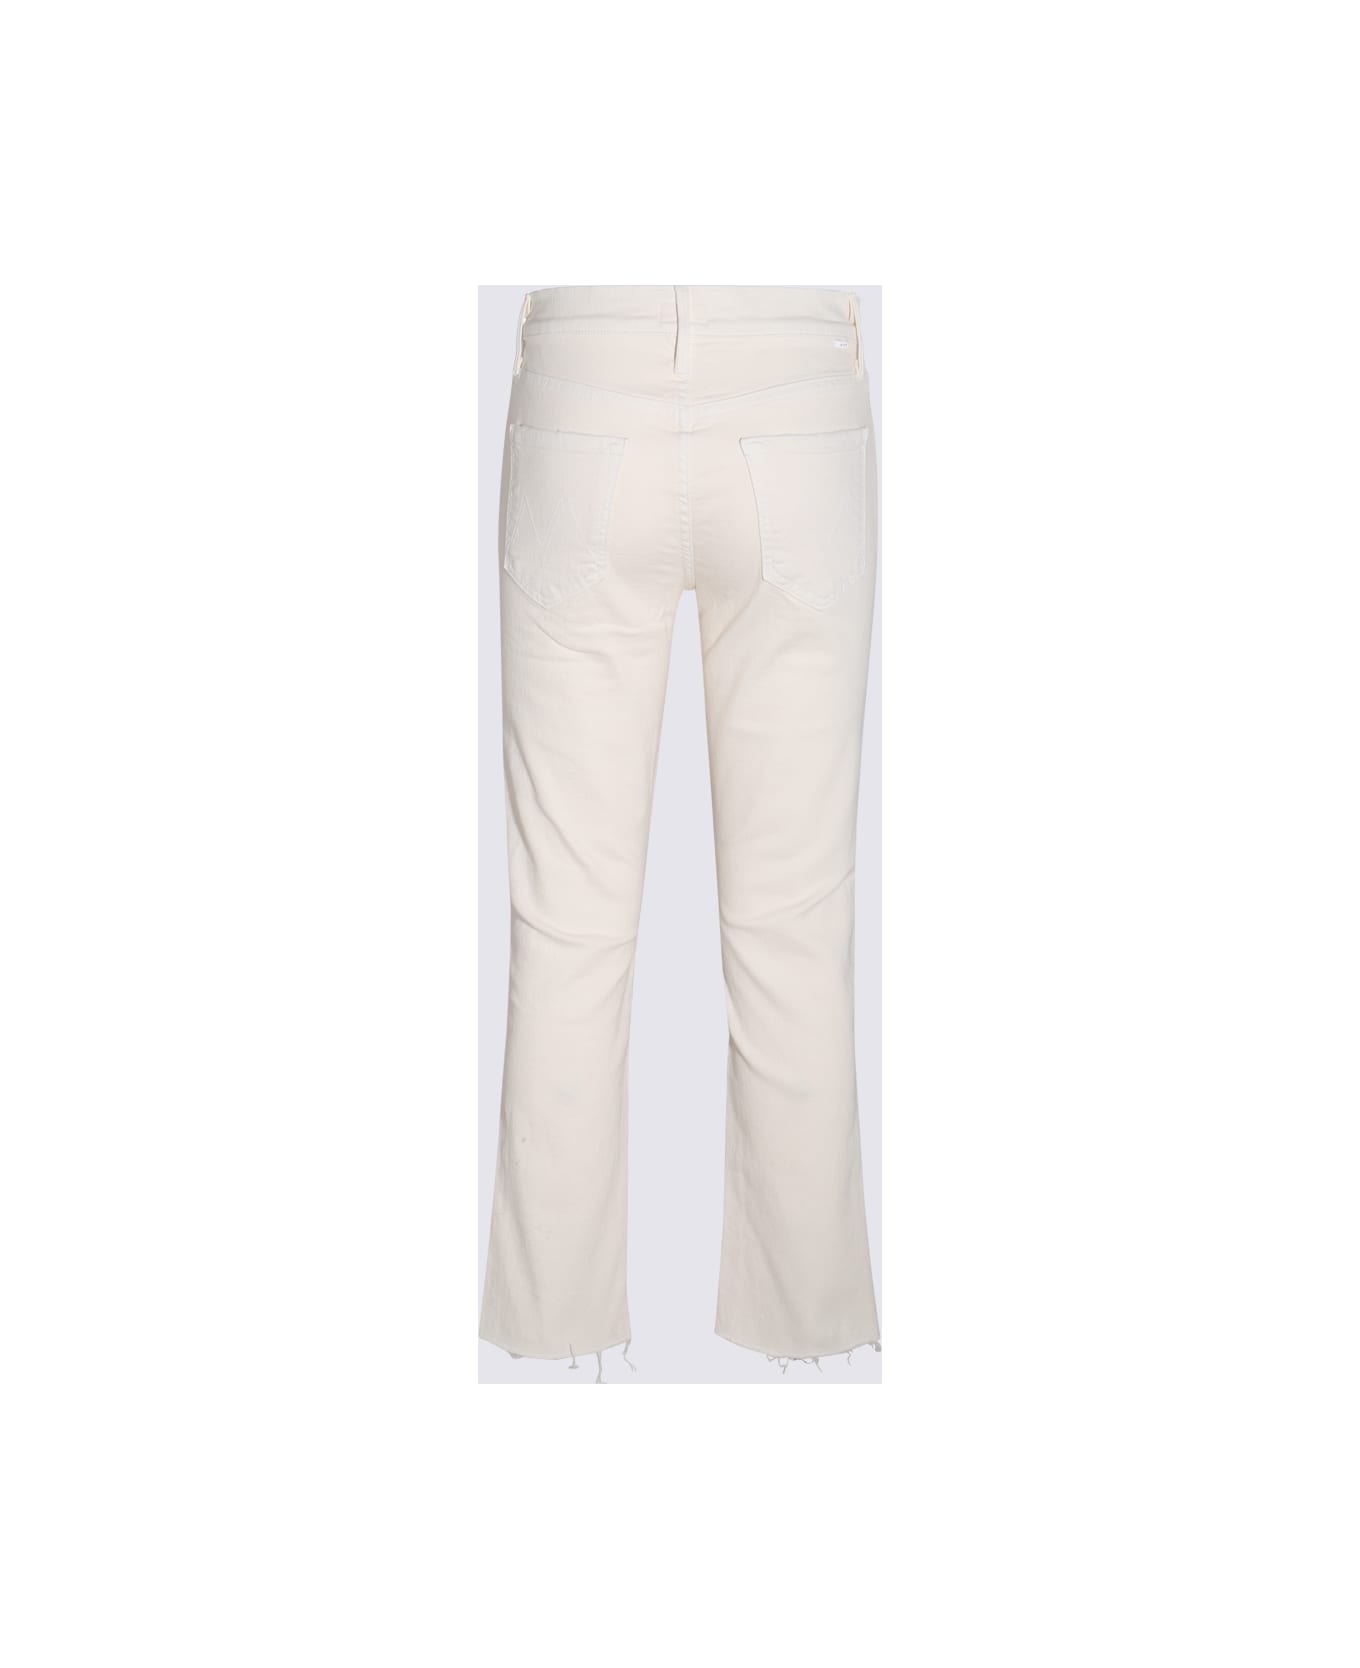 Mother Cream Denim Cropped The Raskal Ripped Ankle Jeans - White